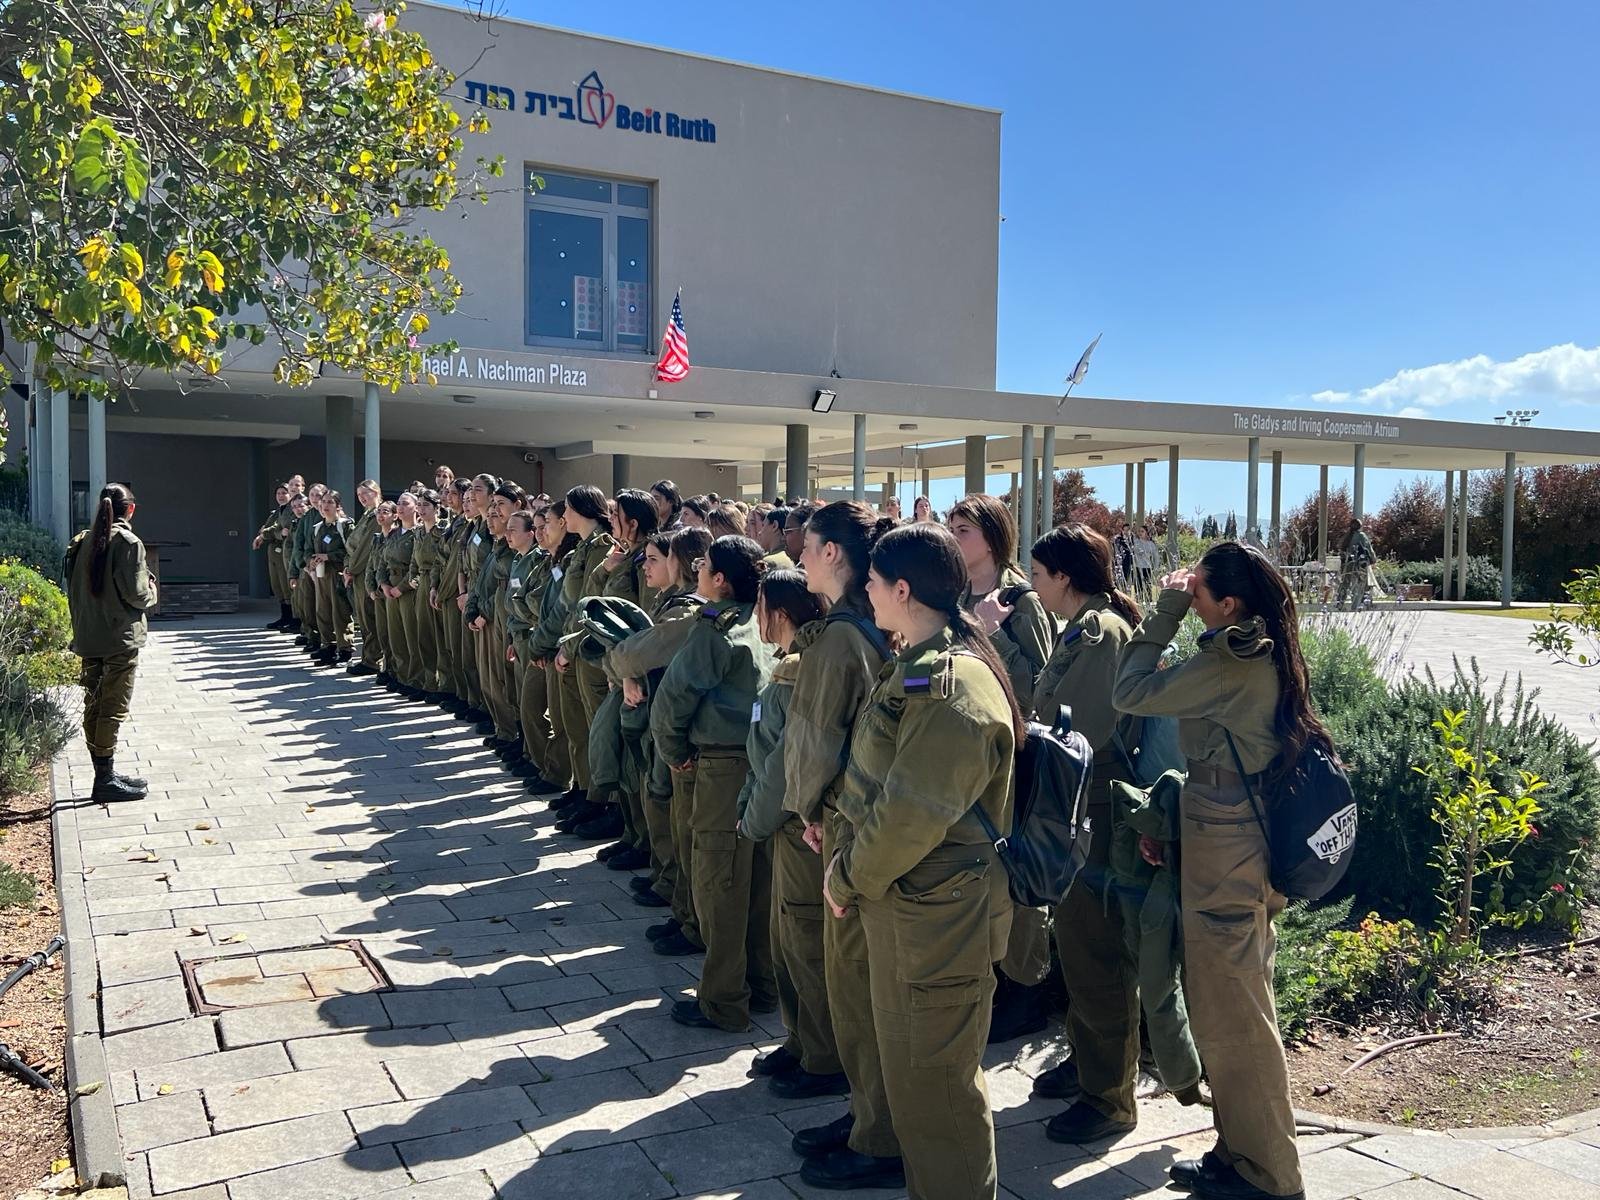 Beit Ruth and the IDF have been long-time partners in training soldiers how to address the unique needs of girls at-risk so they may serve successfully.